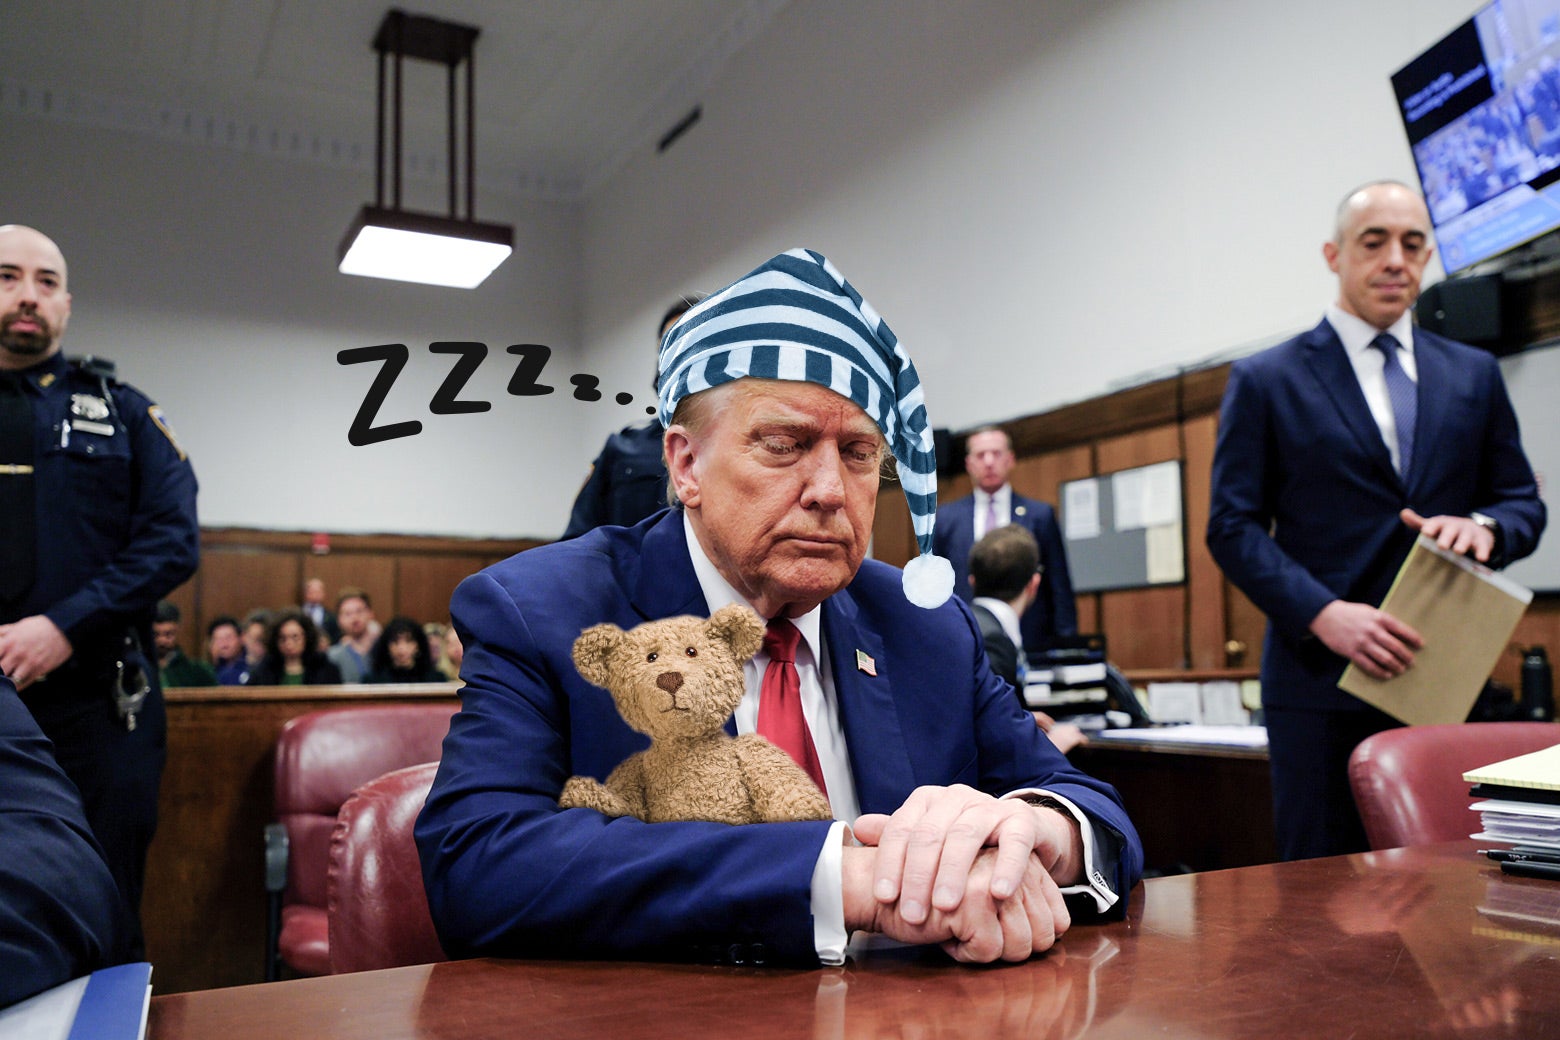 A photo of Donald Trump with his eyes closed in court. A teddy bear, a little cap, and some zzzz's have been added.